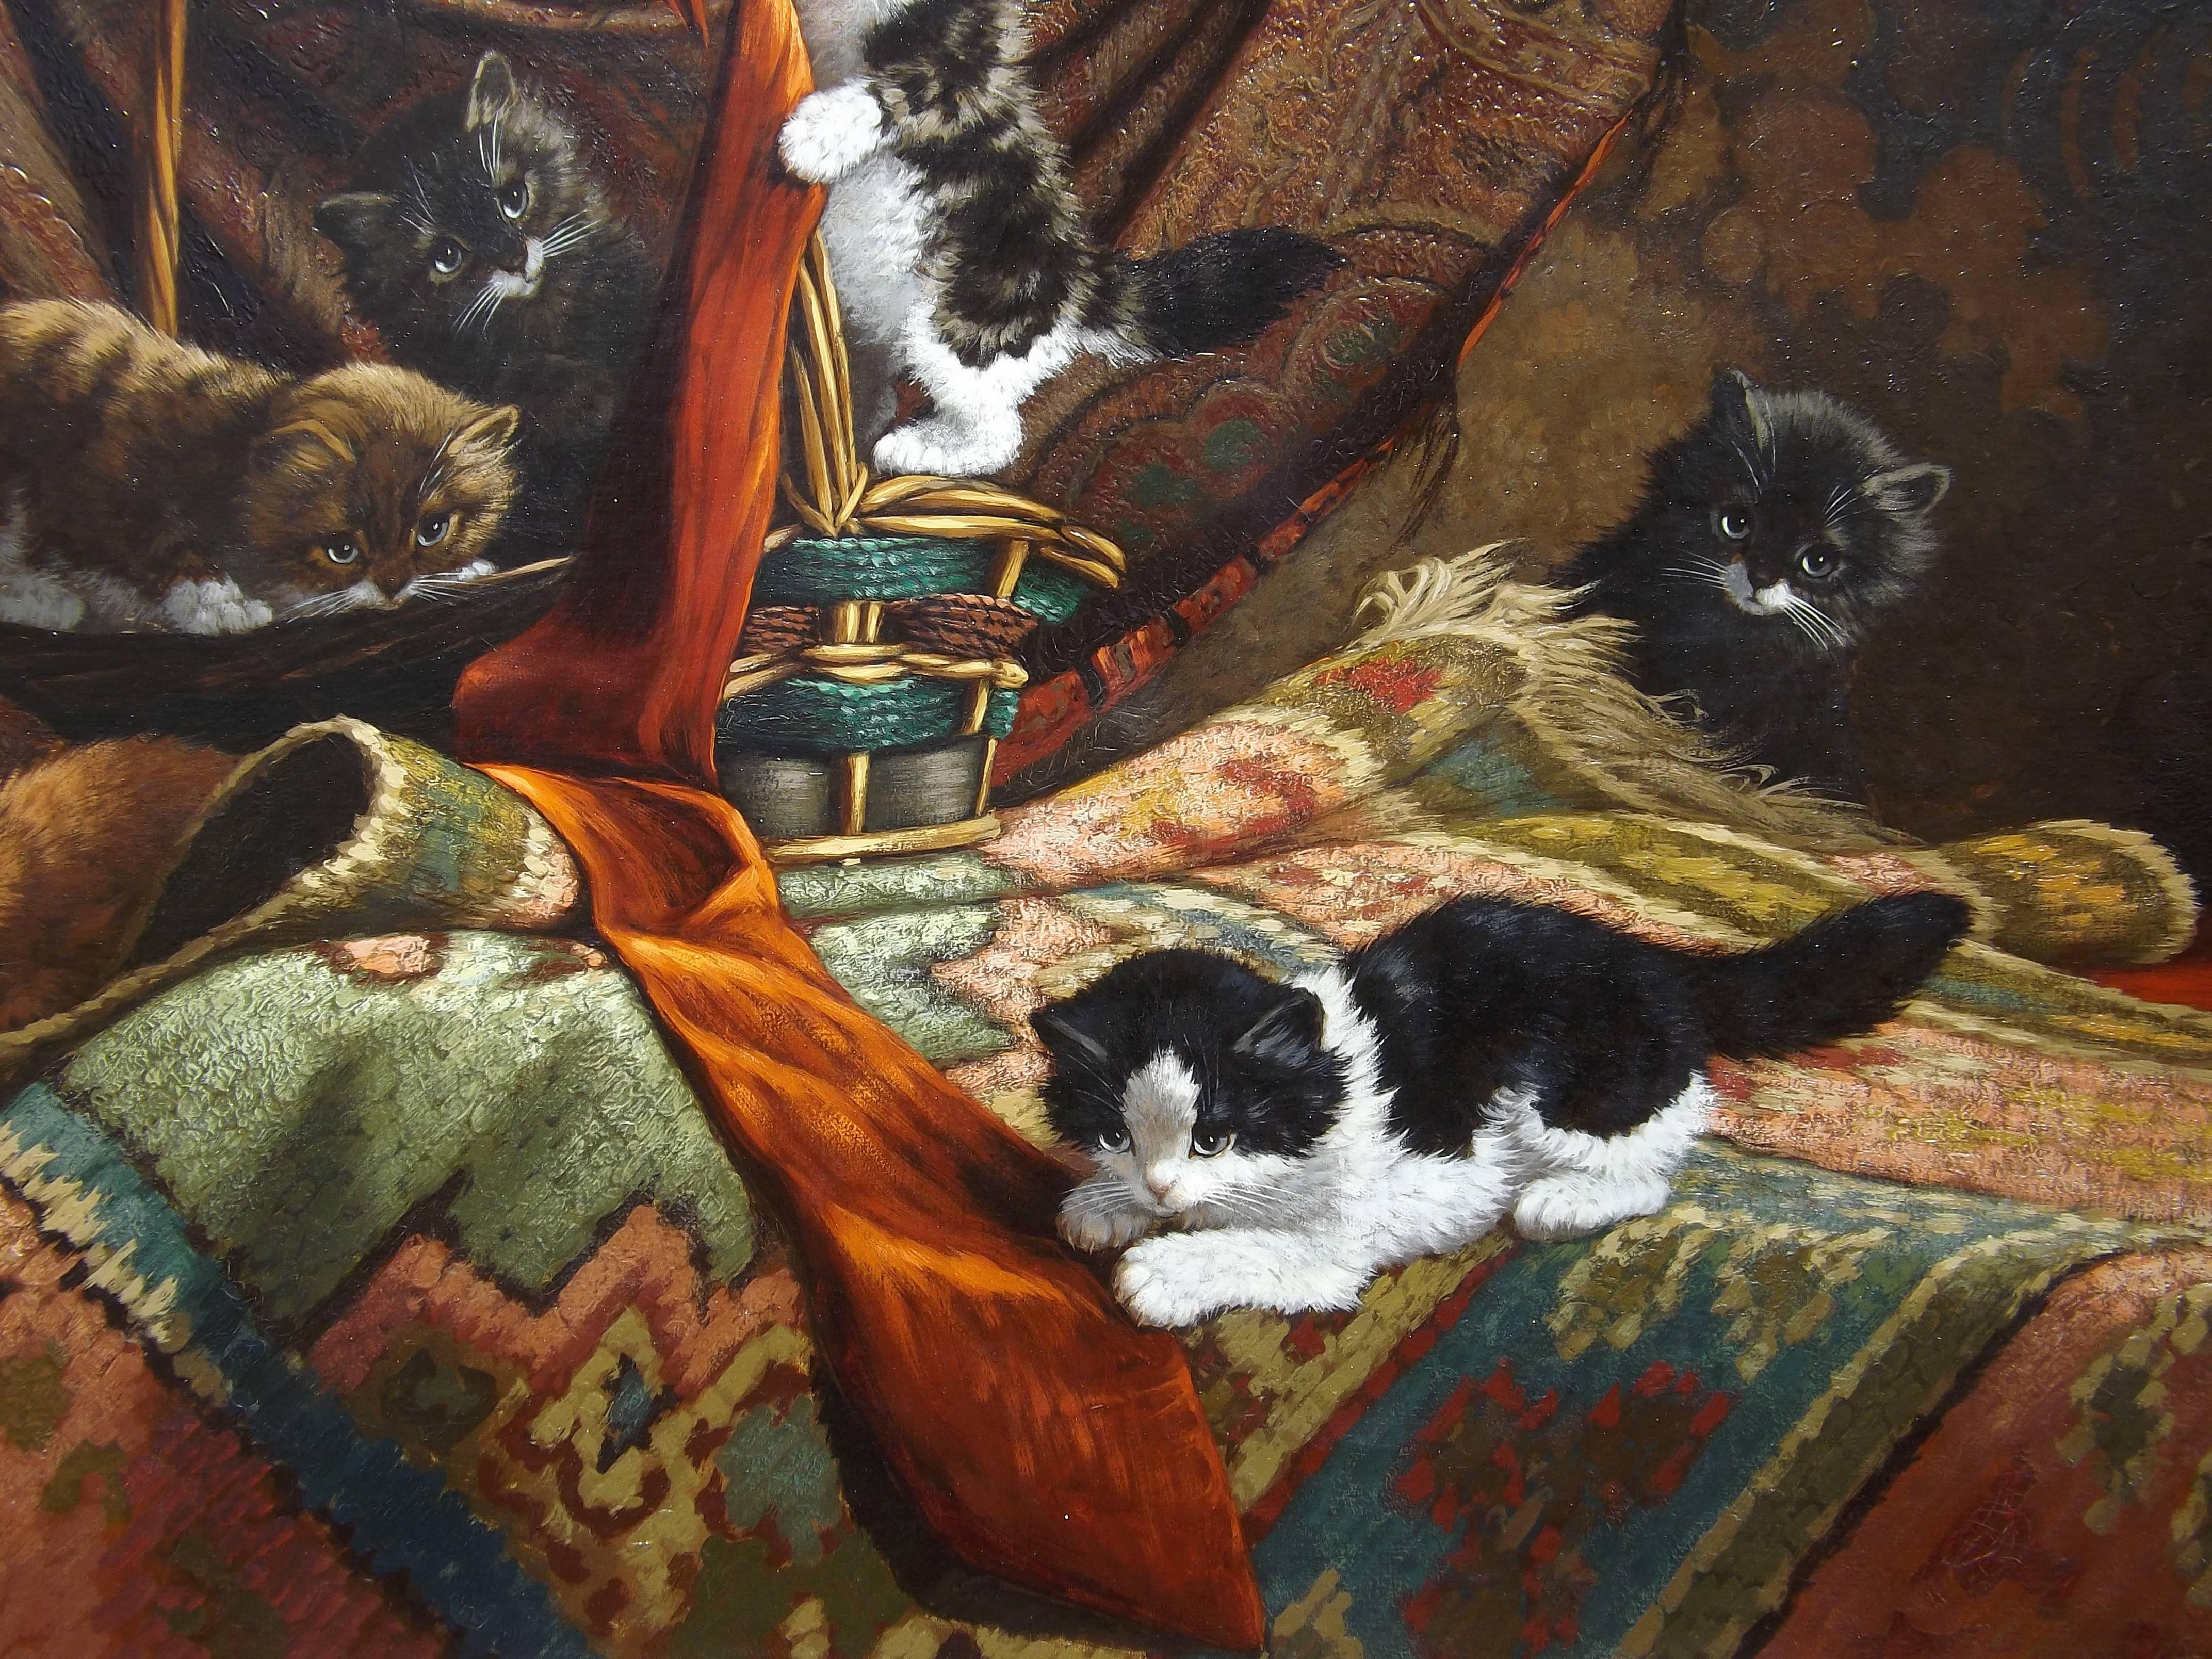 Second only to Henriette Ronner in the depiction of cats and in particular his portrayal of mischievous playful kittens, Cornelis Raaphorst was born in 1875 in Nieuwkoop, The Netherlands. A self-taught artist with exceptional talent for detail, he